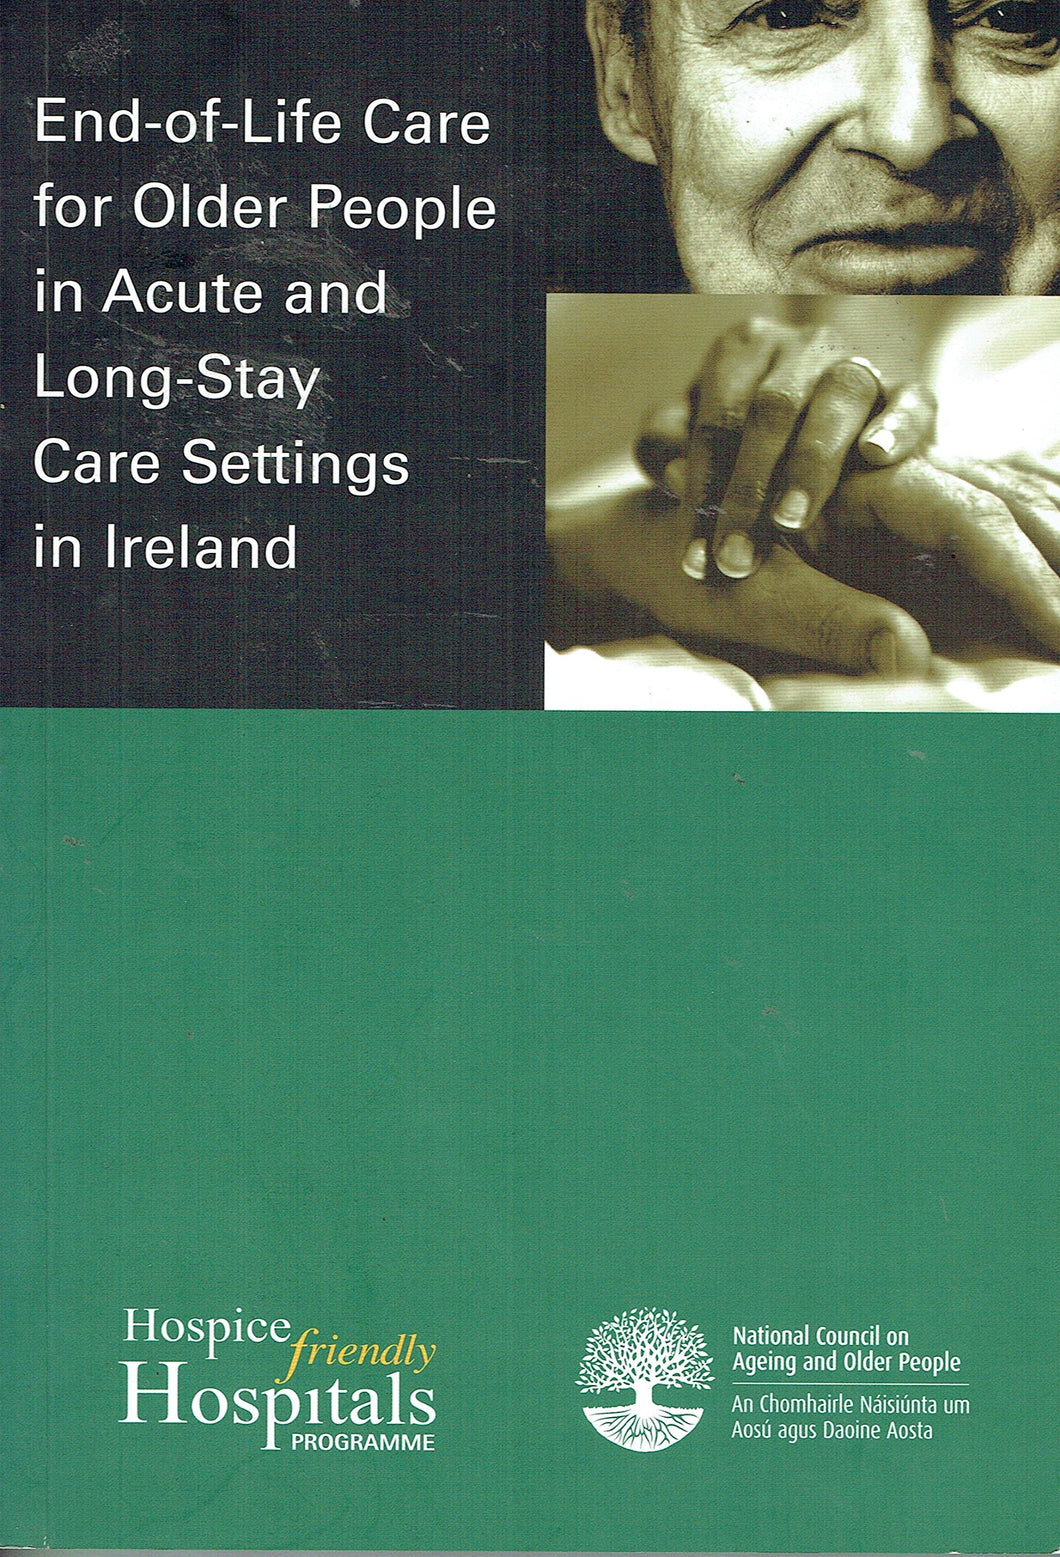 End-of-Life Care for Older People in Acute and Long-Stay Care Settings in Ireland